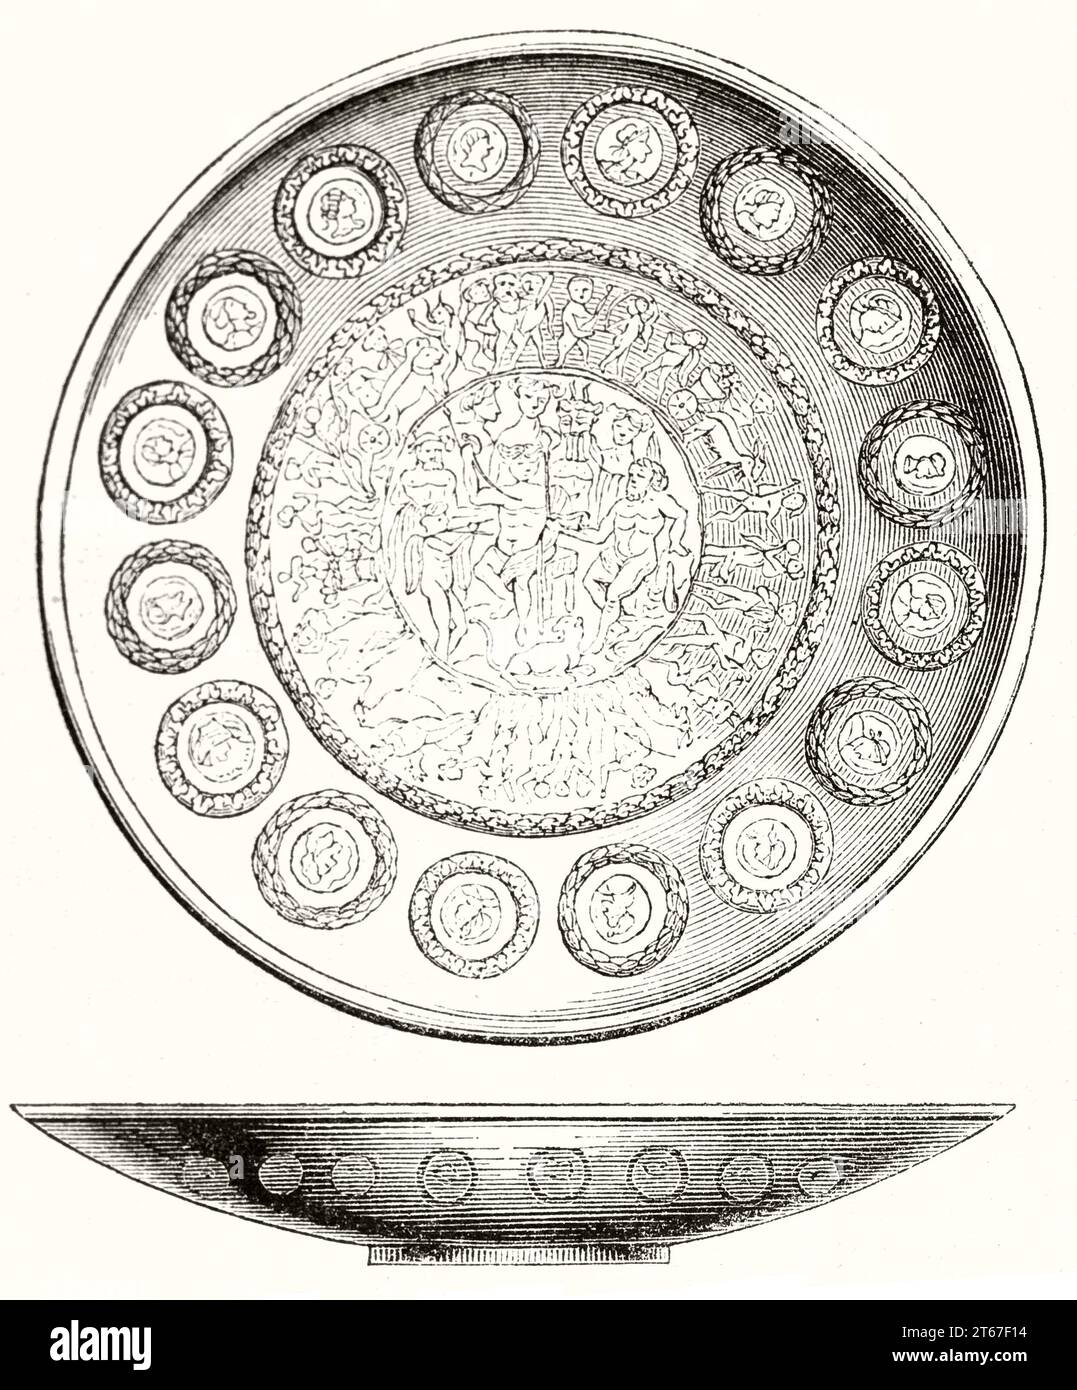 Old illustration of a golden patera (metal libation bowl). By unidentified author, publ. on Magasin Pittoresque, Paris, 1851 Stock Photo